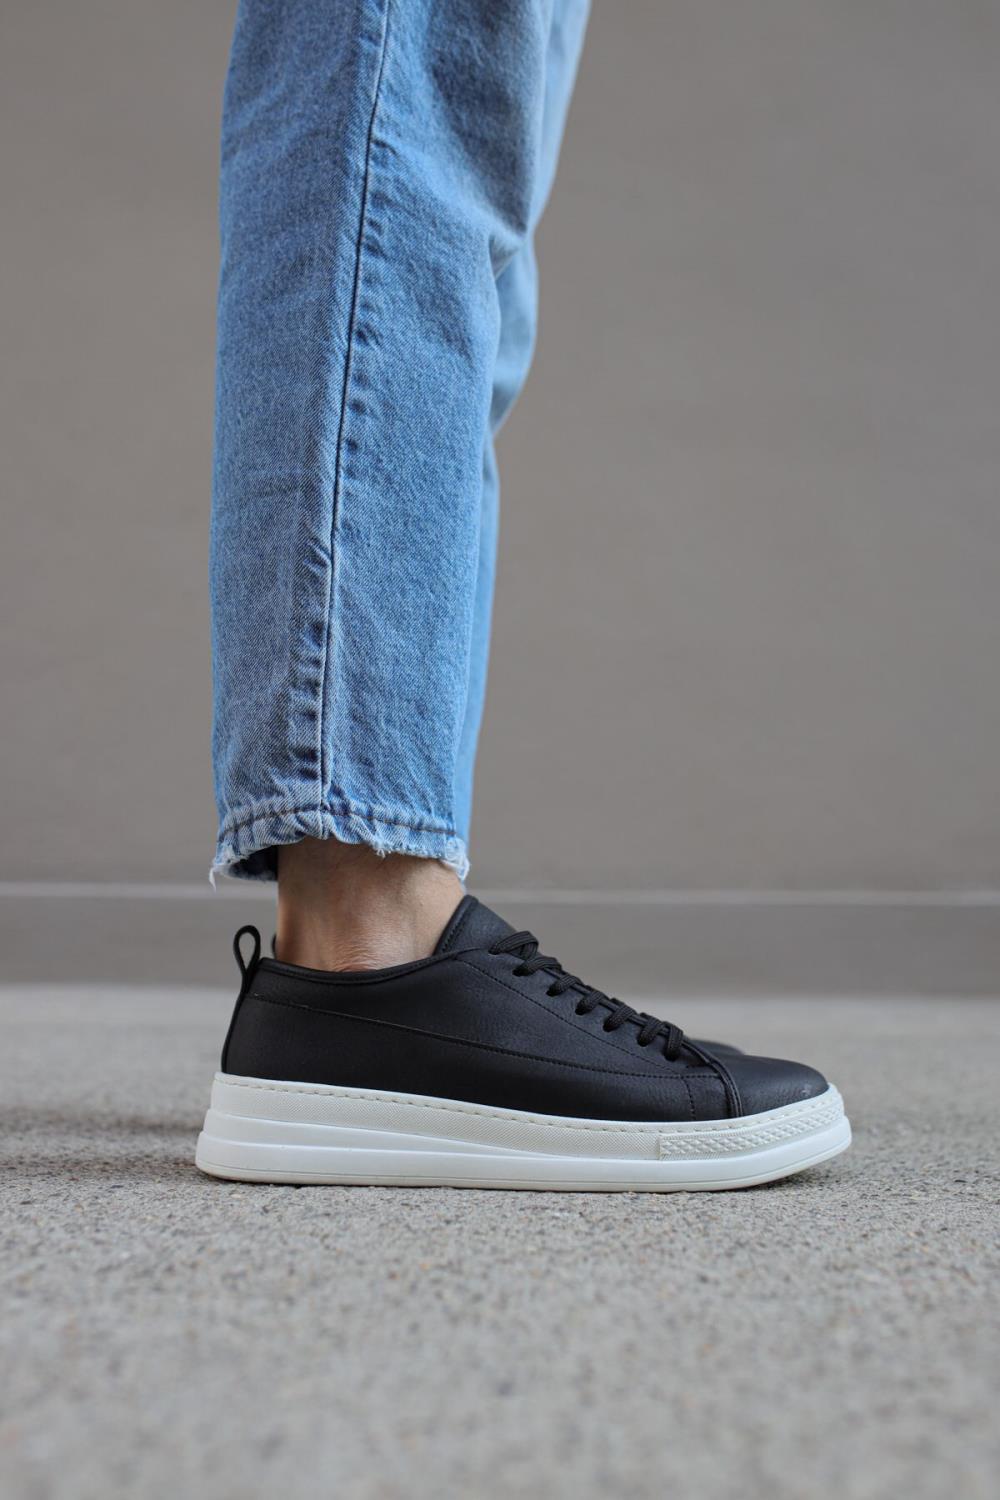 Knack Sneakers Shoes 010 Black (White Sole) - STREETMODE ™